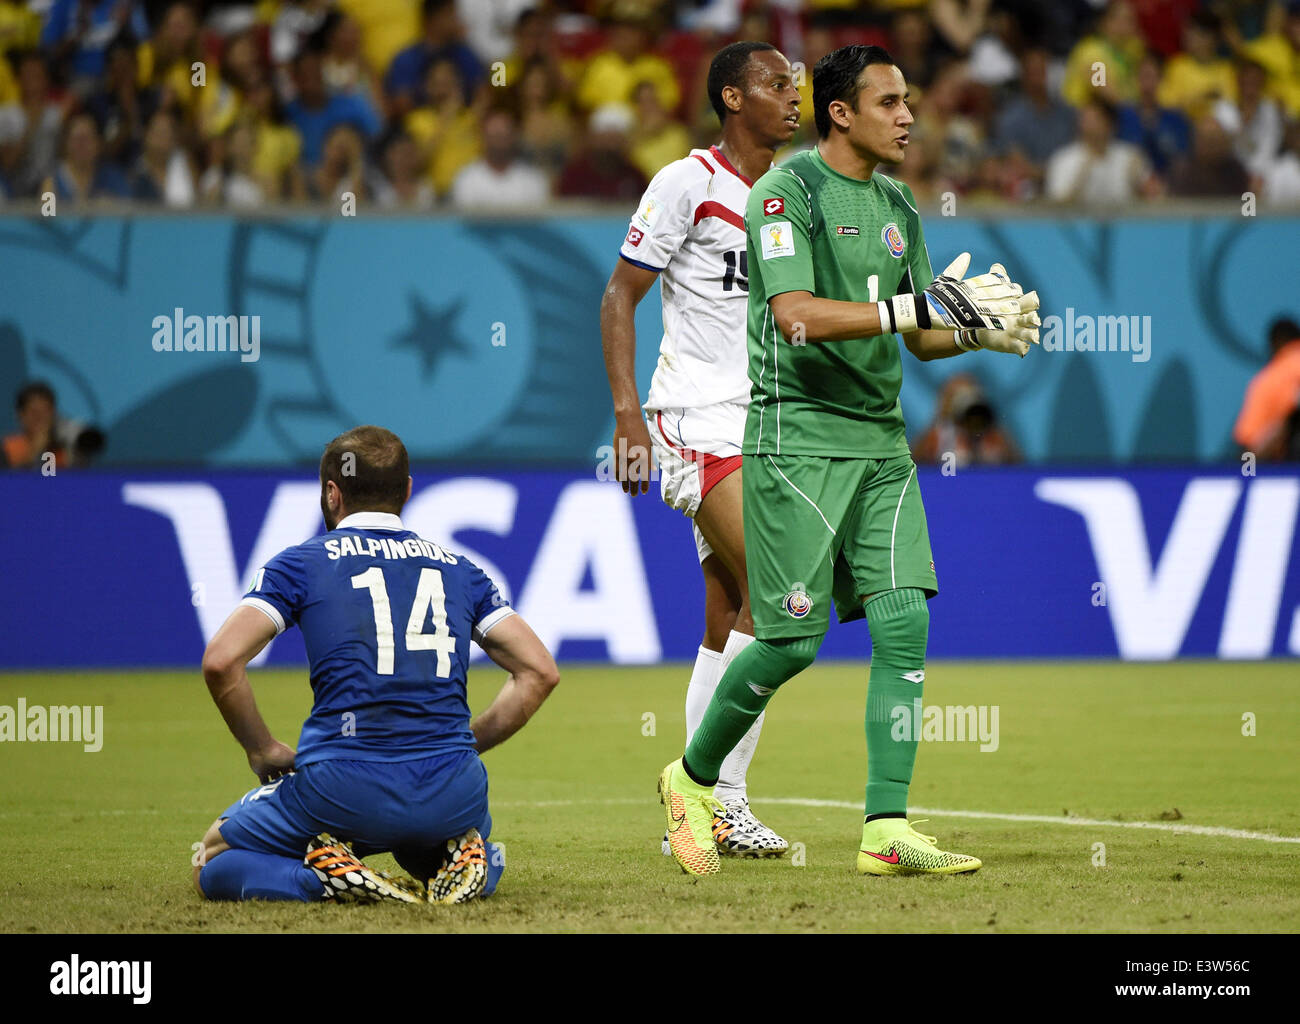 Recife, Brazil. 29th June, 2014. Greece's Dimitris Salpingidis (L) reacts as Costa Rica's Celso Borges (C) and goalkeeper Keilor Navas rescue the attack during a Round of 16 match between Costa Rica and Greece of 2014 FIFA World Cup at the Arena Pernambuco Stadium in Recife, Brazil, on June 29, 2014. Credit:  Lui Siu Wai/Xinhua/Alamy Live News Stock Photo